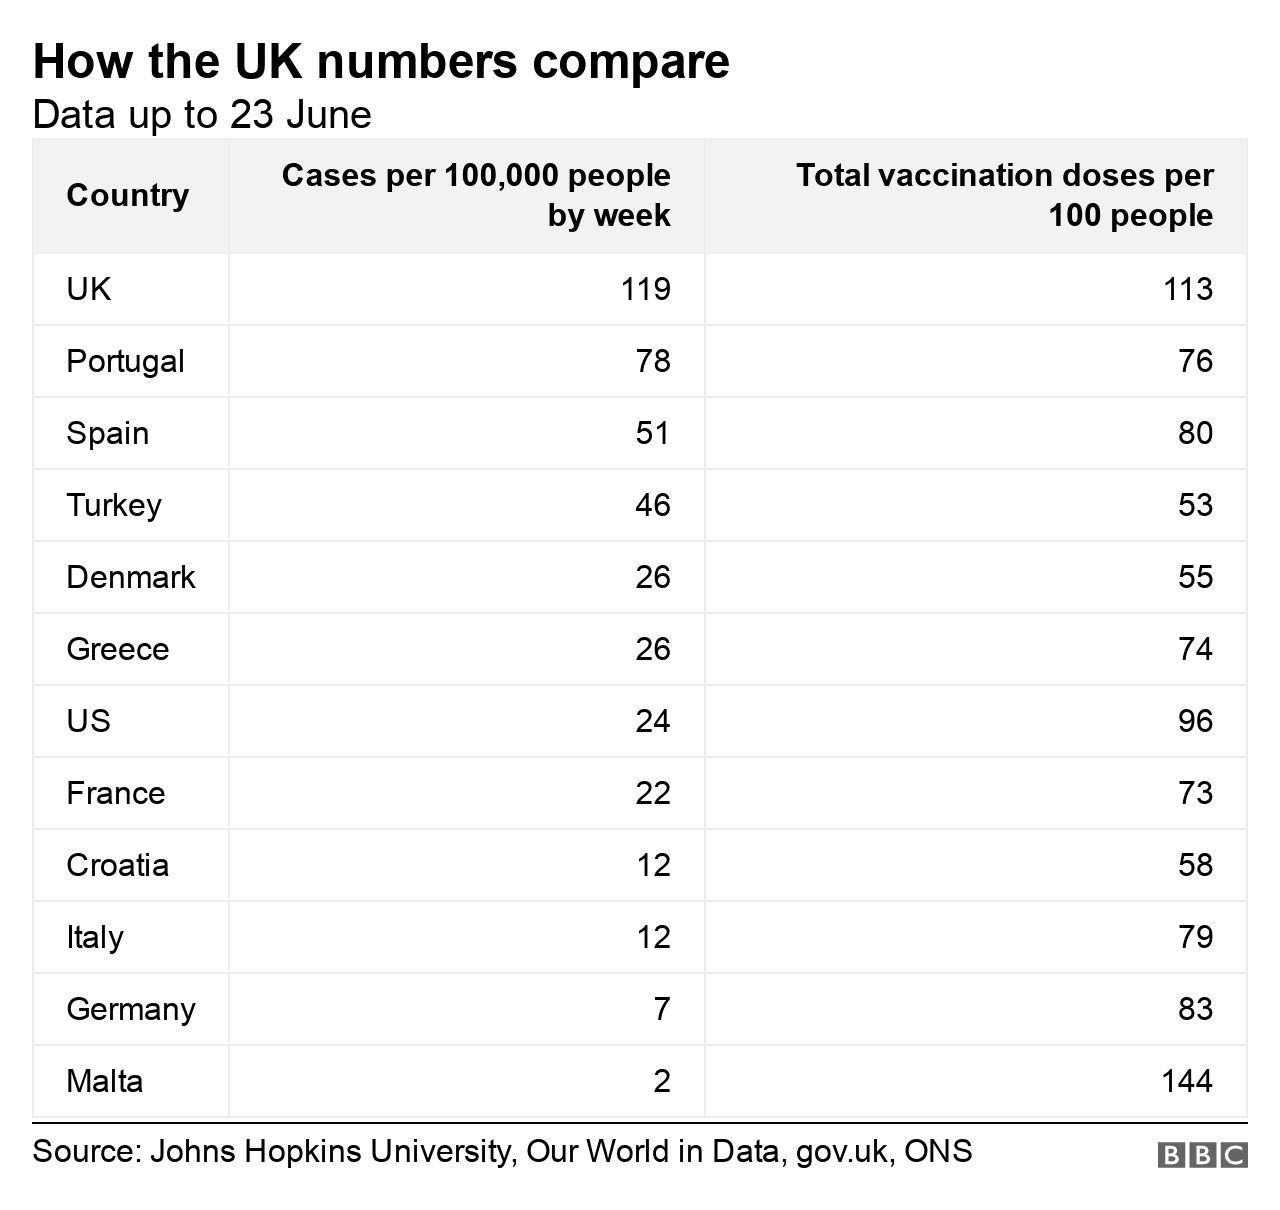 Table showing how the UK Covid case numbers compare